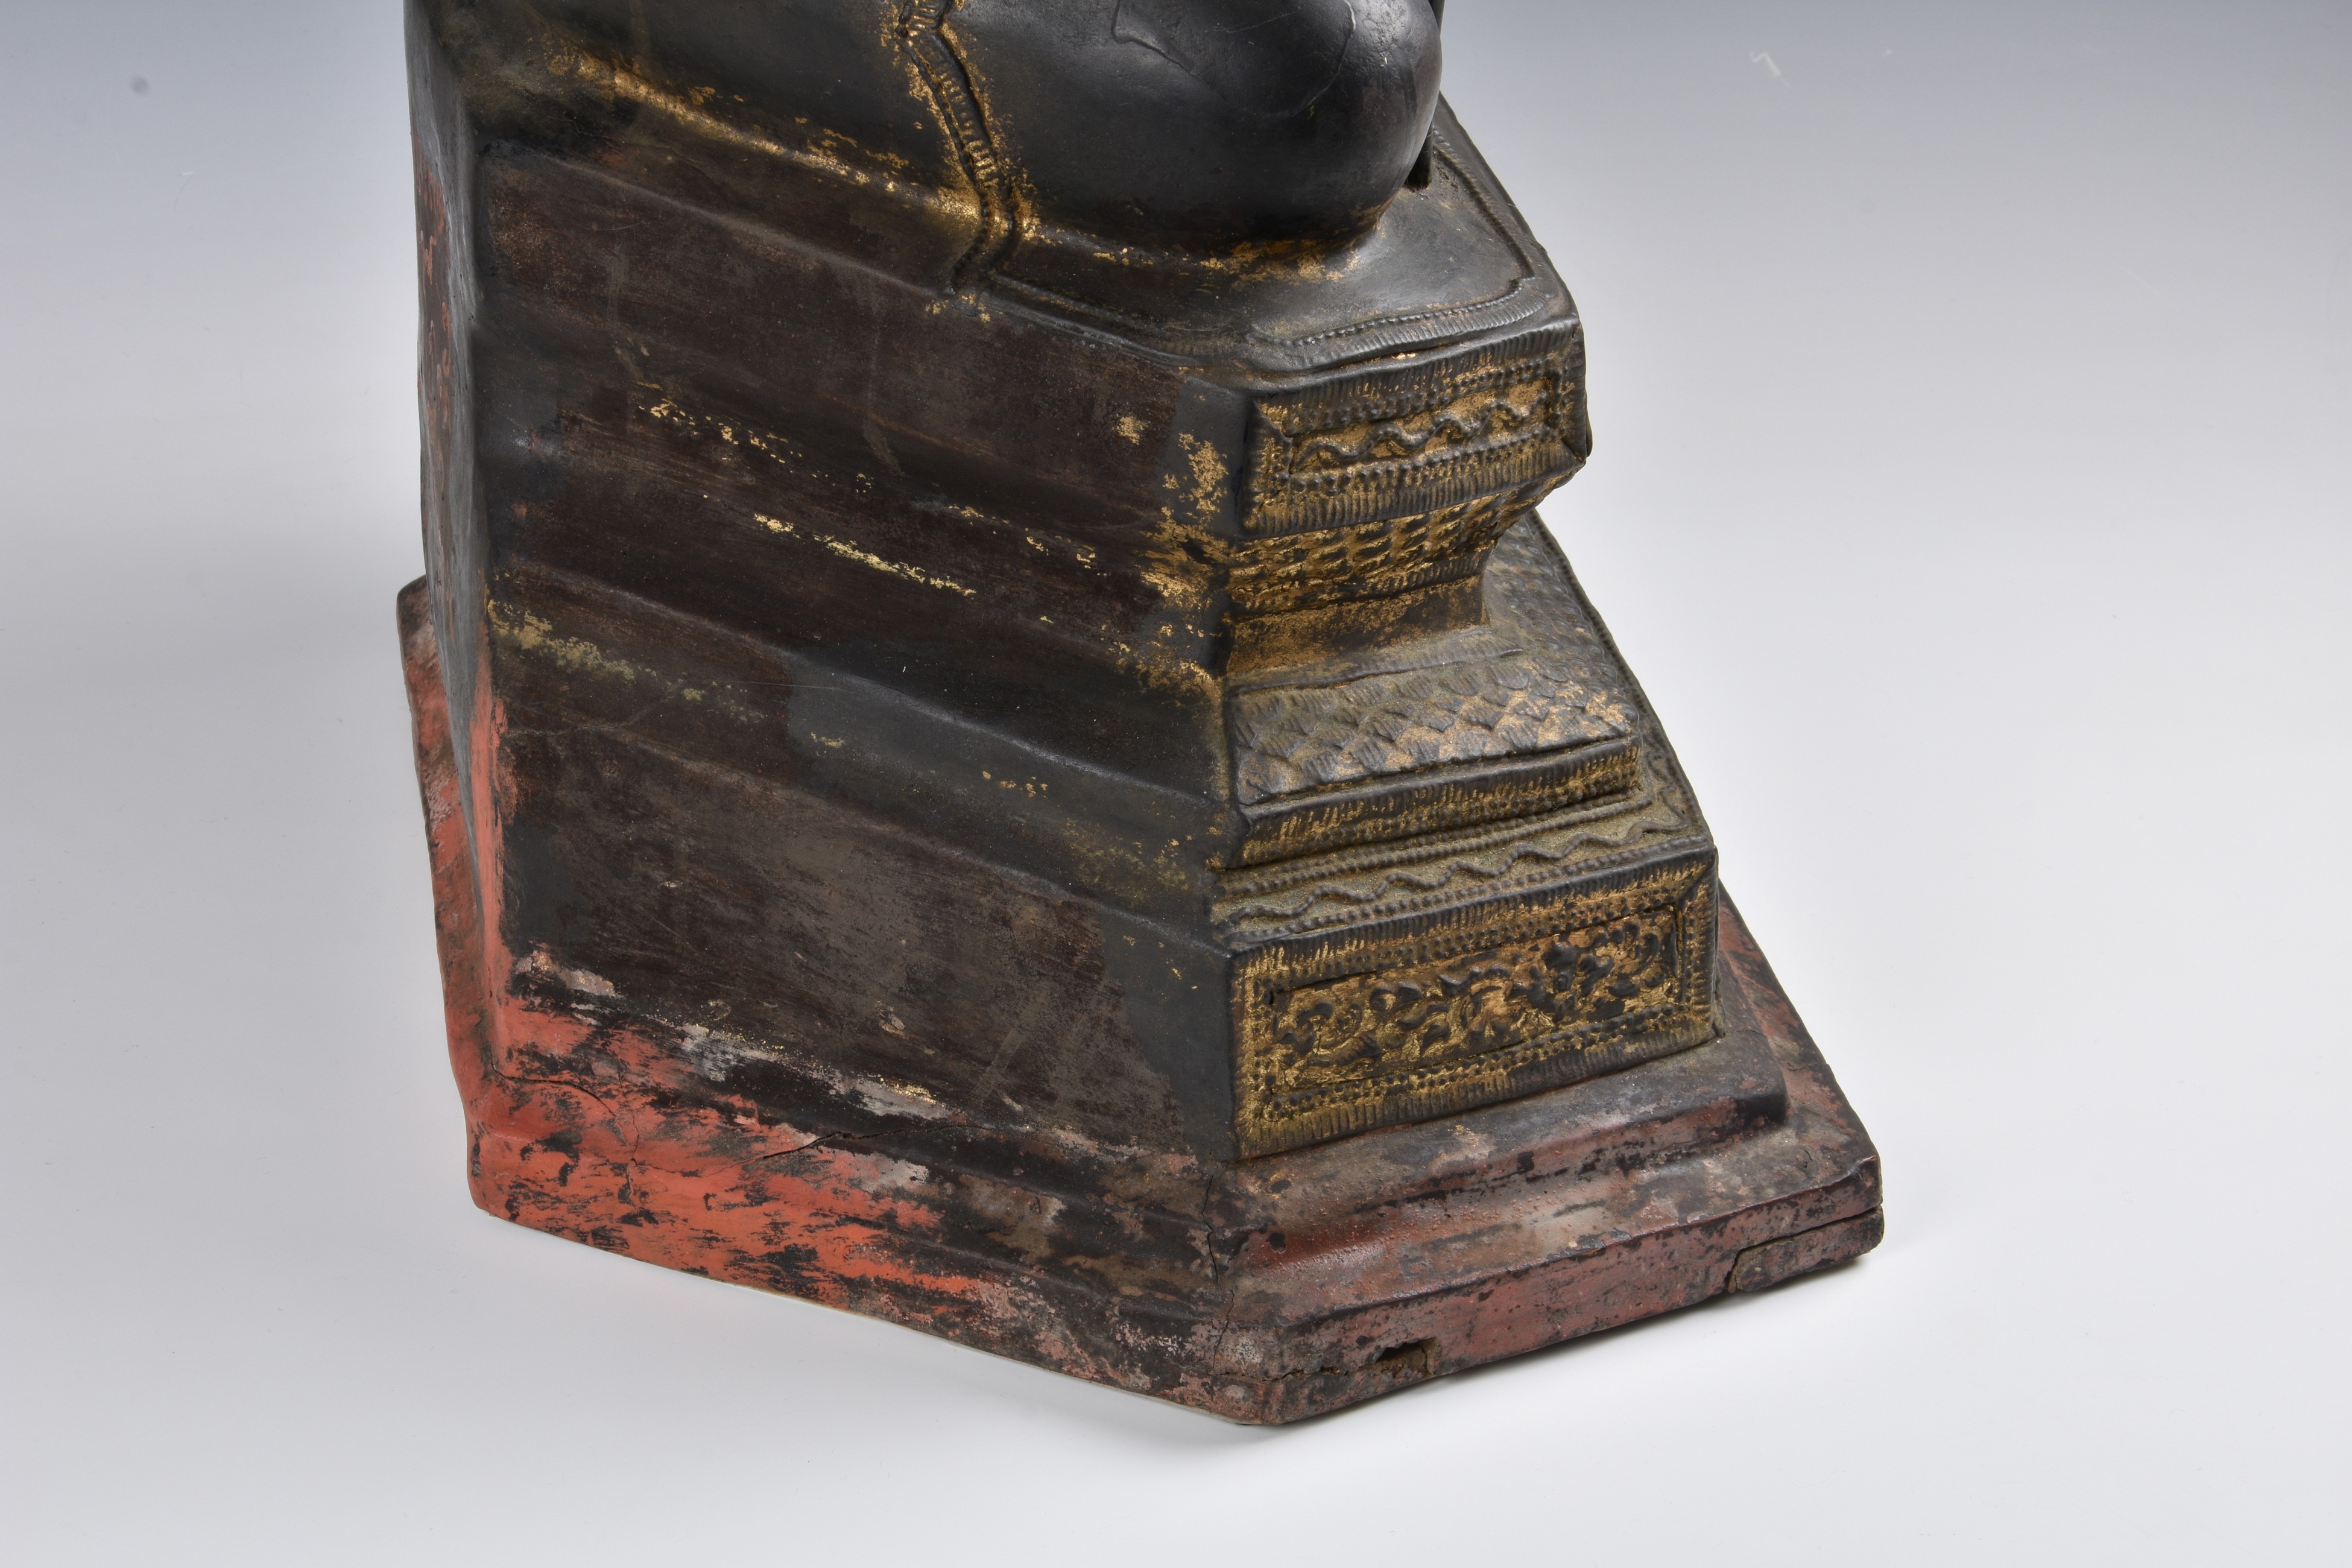 A 19th century Burmese Mandalay dry lacquer seated figure of Buddha - Image 8 of 11